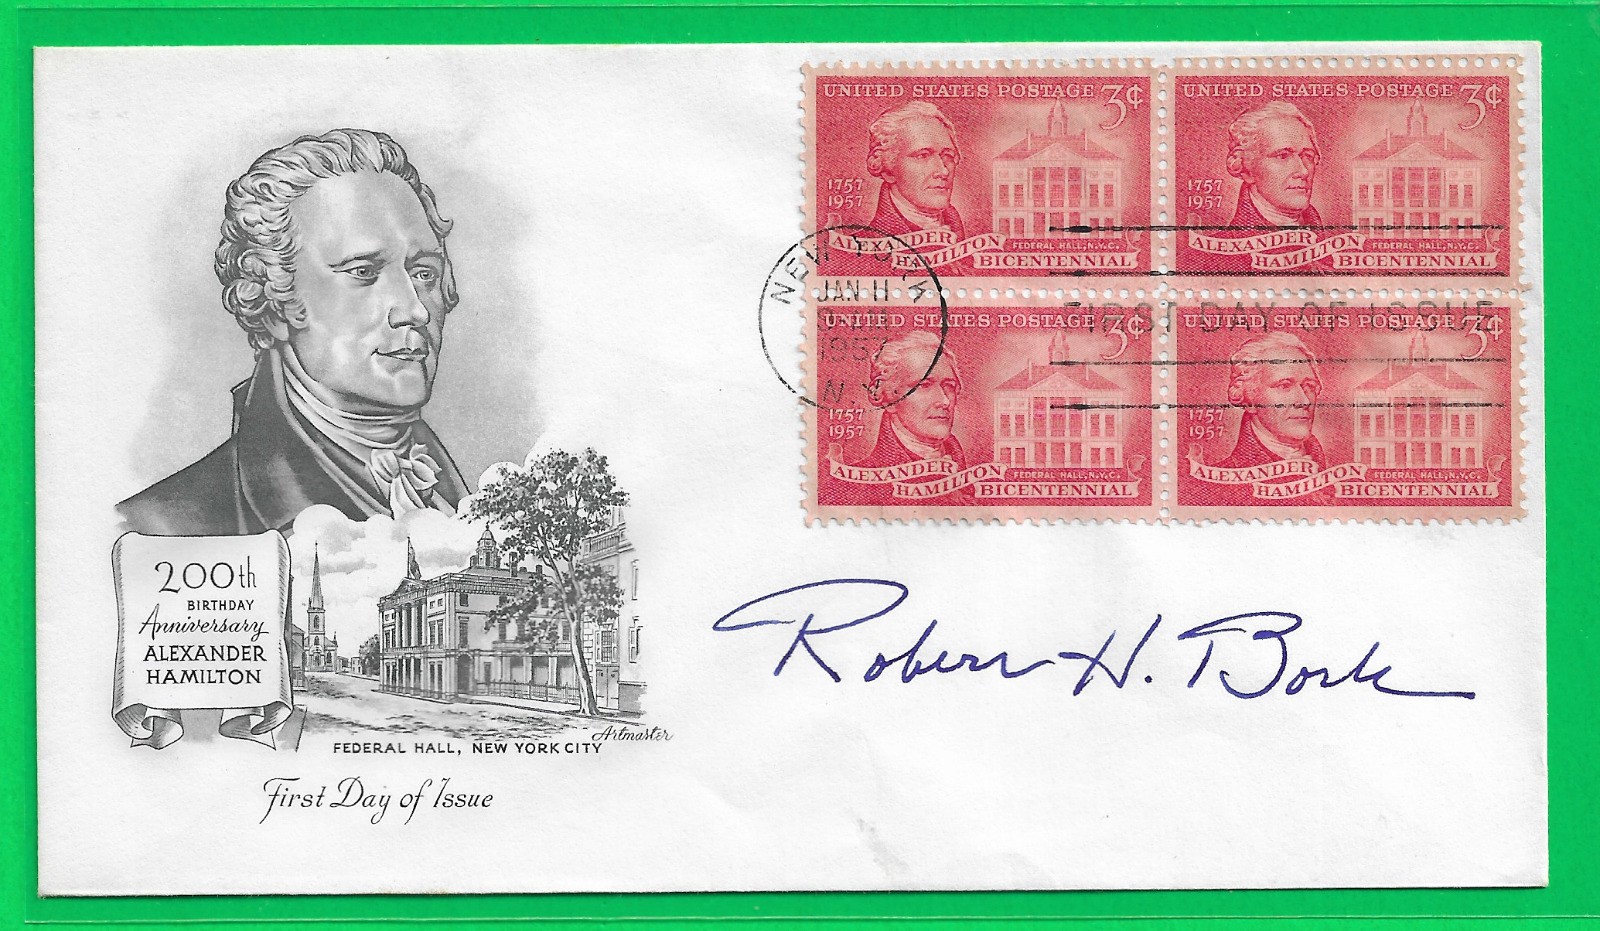 Robert Bork Judge & Supreme Court Nominee Signed Hamilton First Day Cover 1957